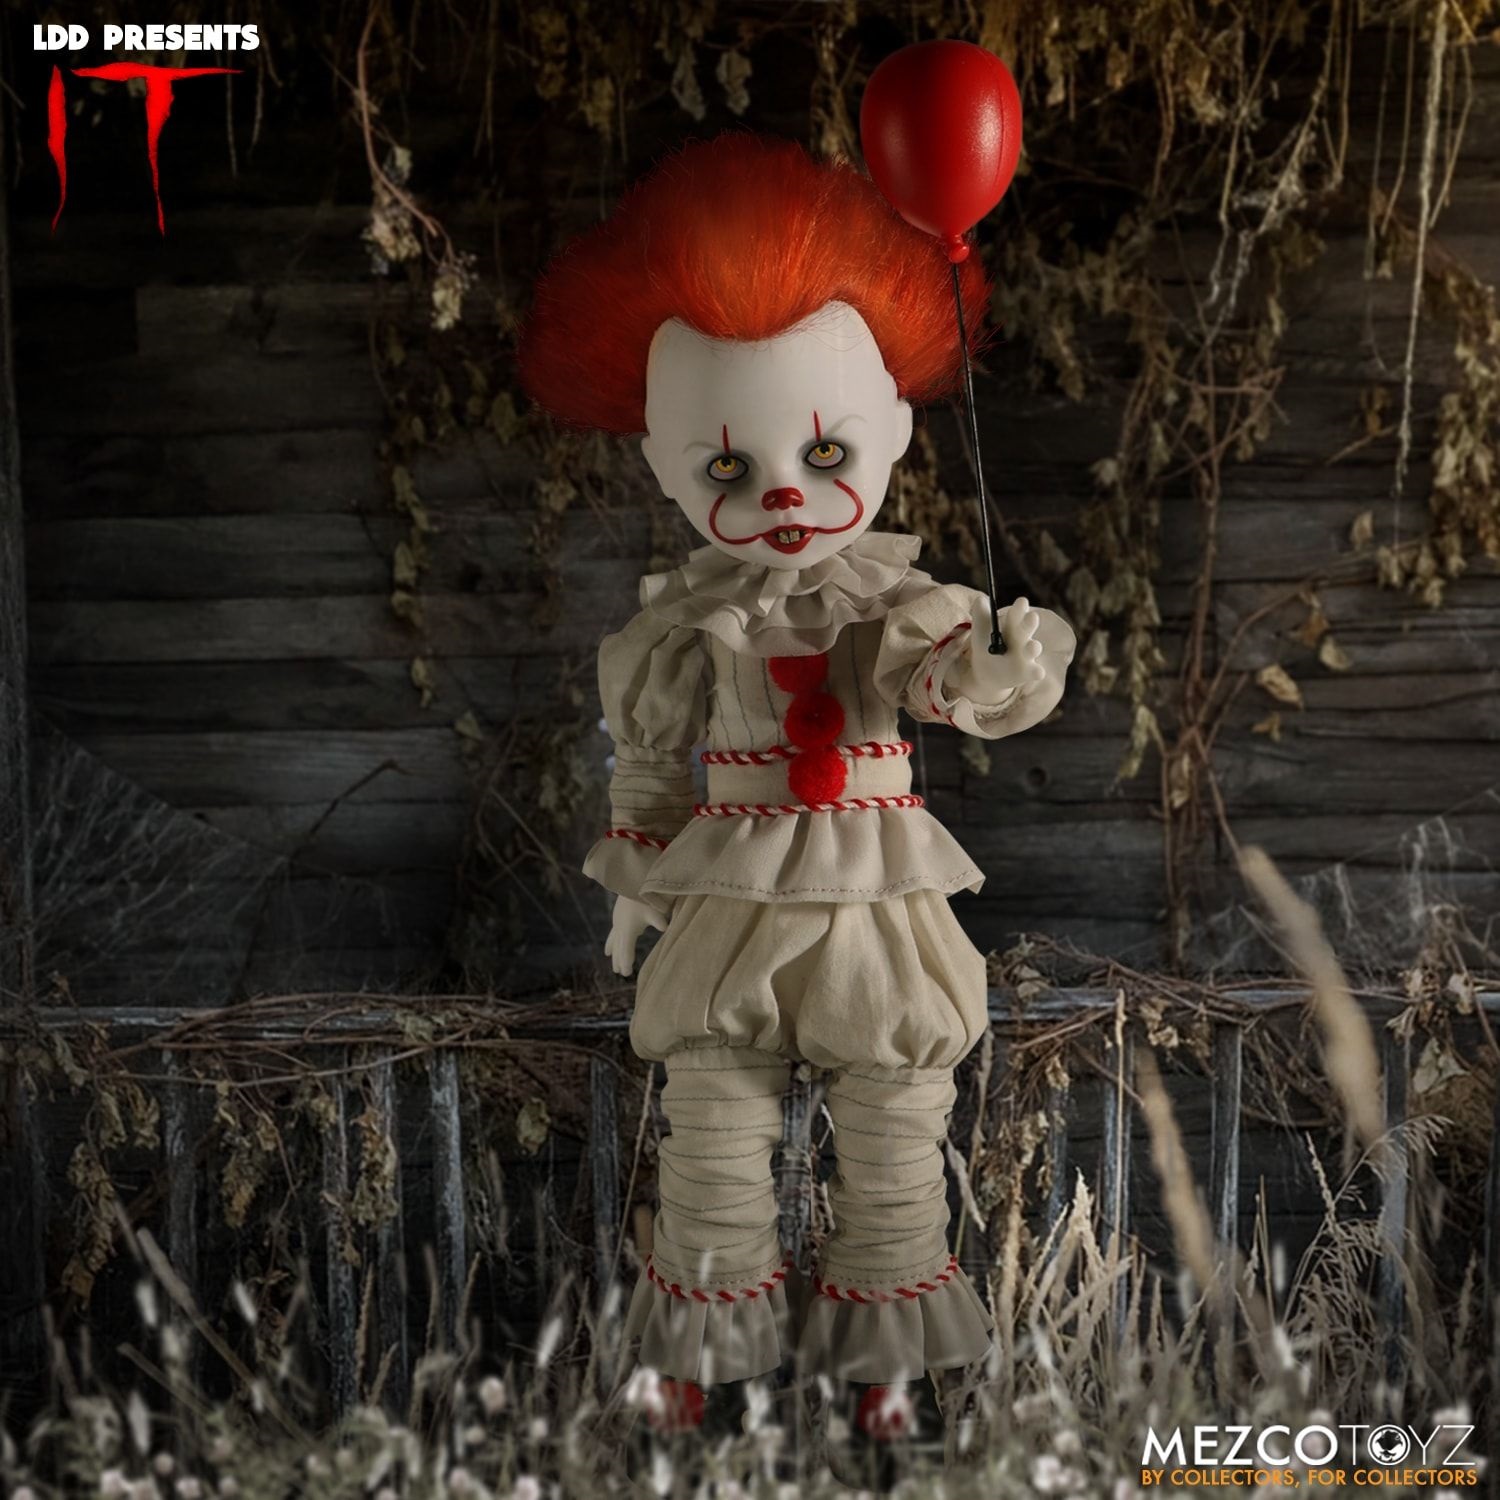 pennywise mezco